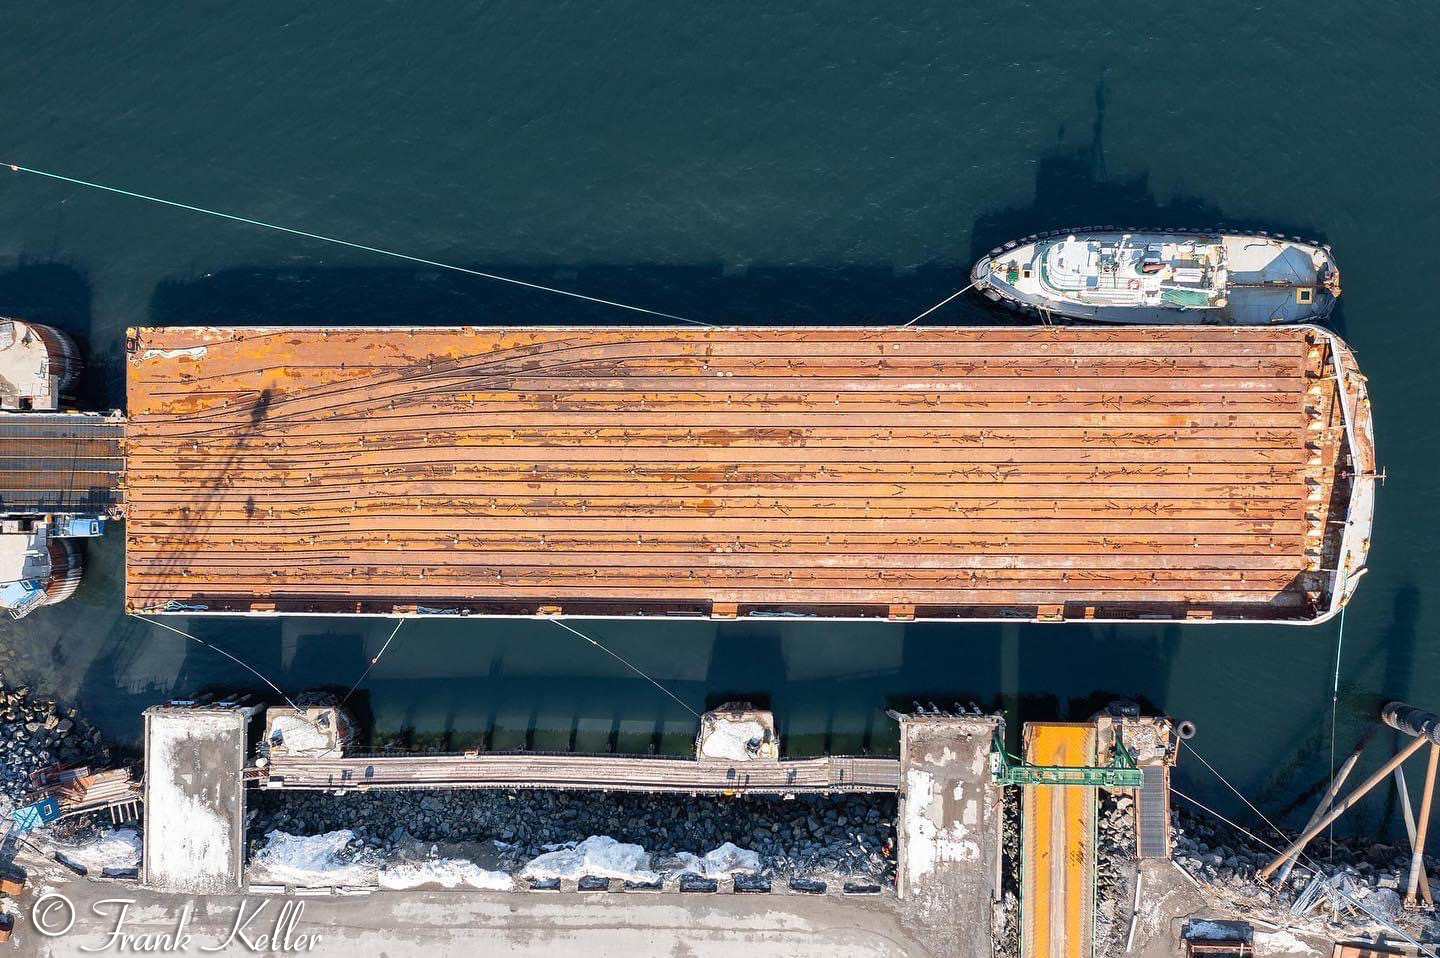 The CN Barge as seen from above prior to loading.